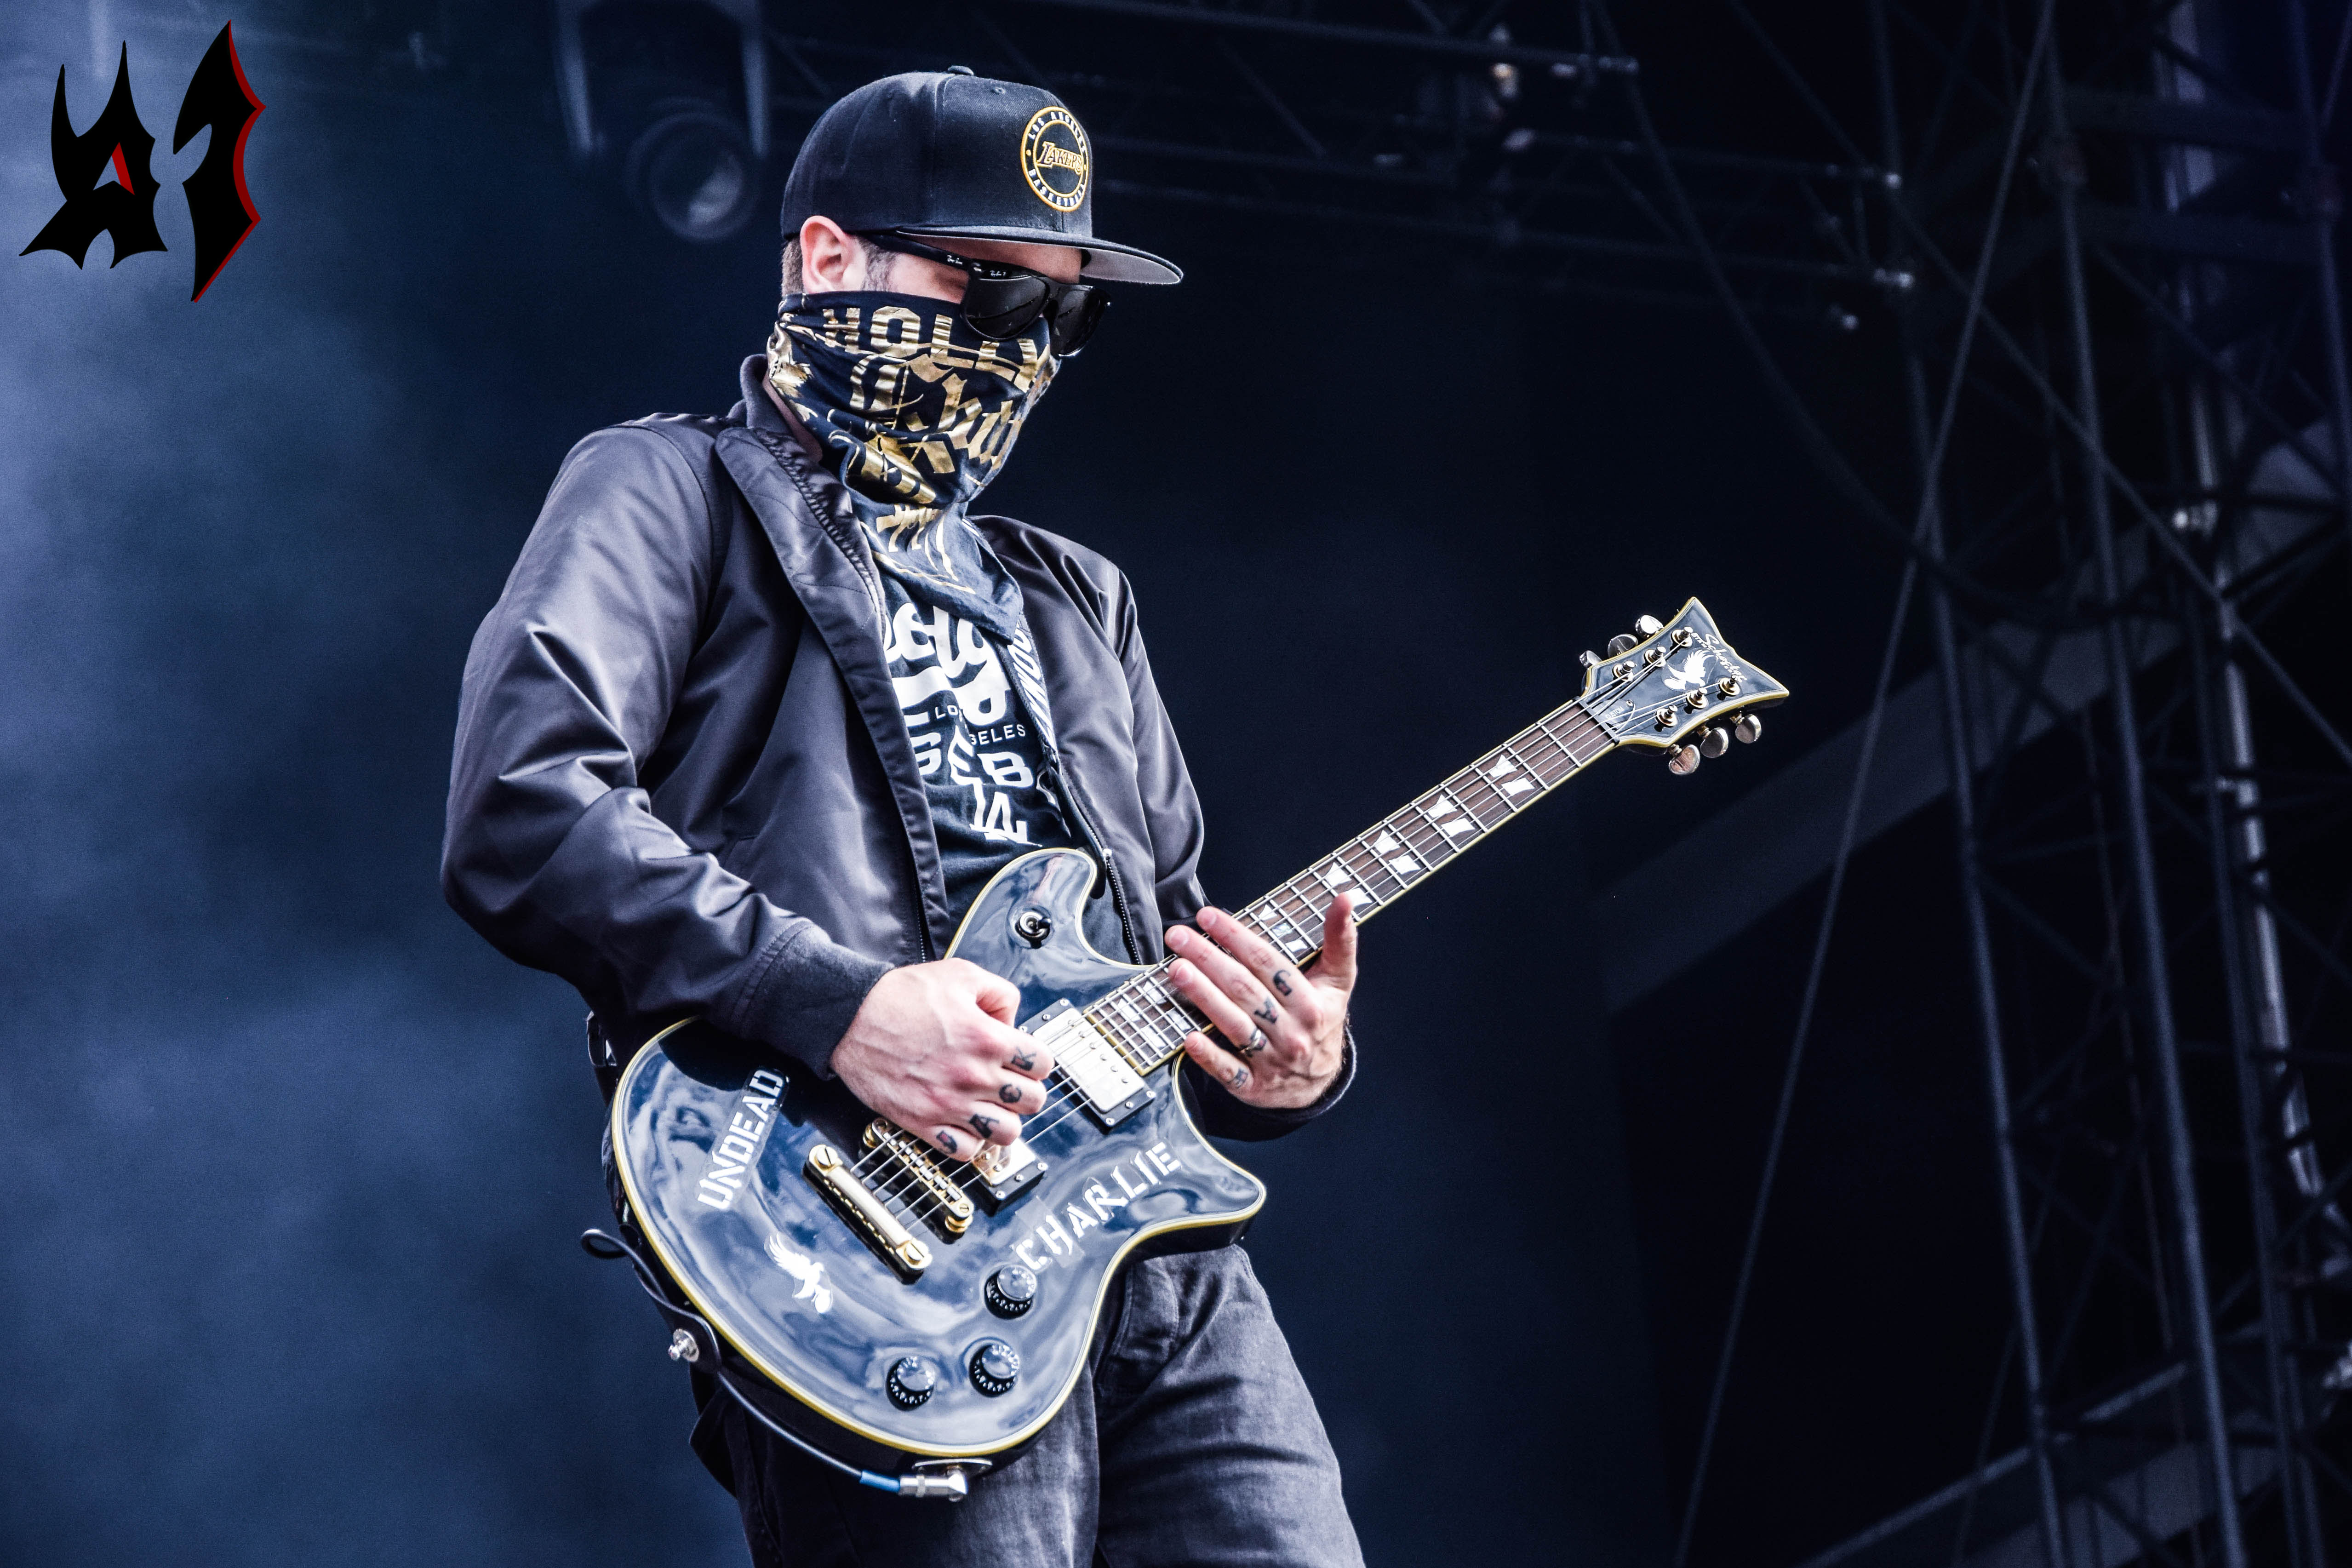 Donwload 2018 – Day 2 - Hollywood Undead 16